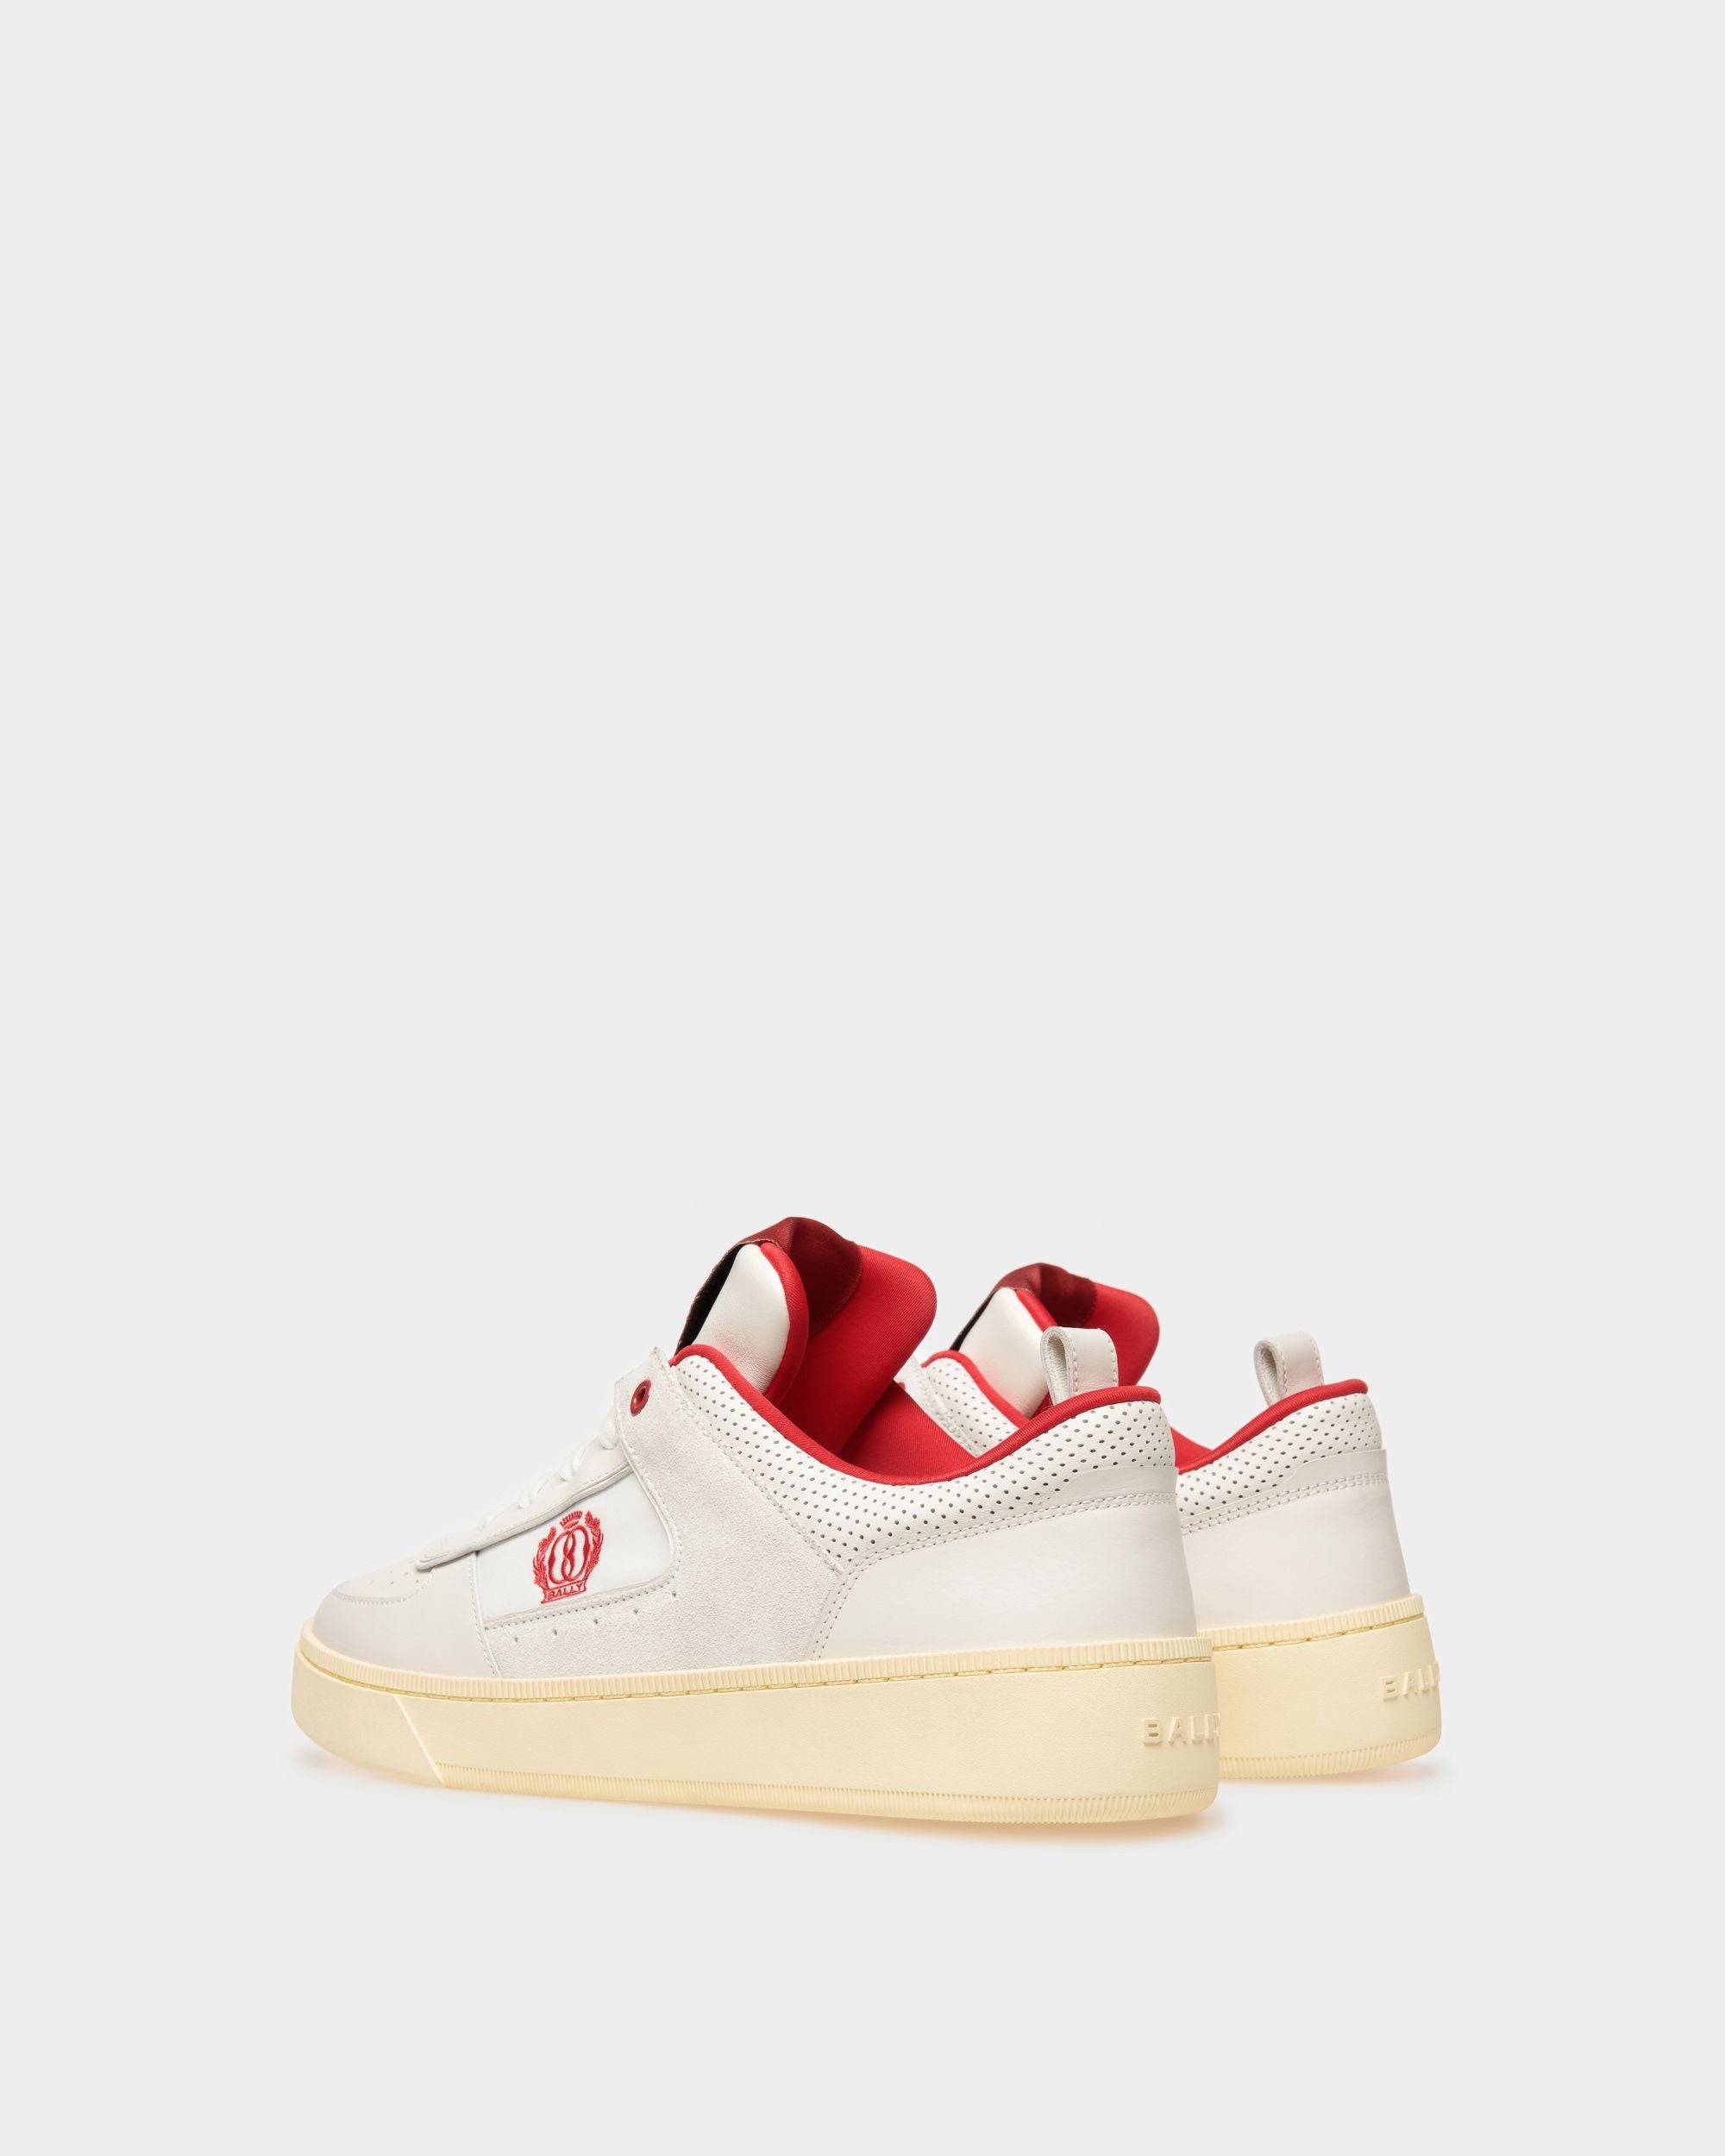 Riweira | Women's Sneakers | White And Red Leather | Bally | Still Life 3/4 Back